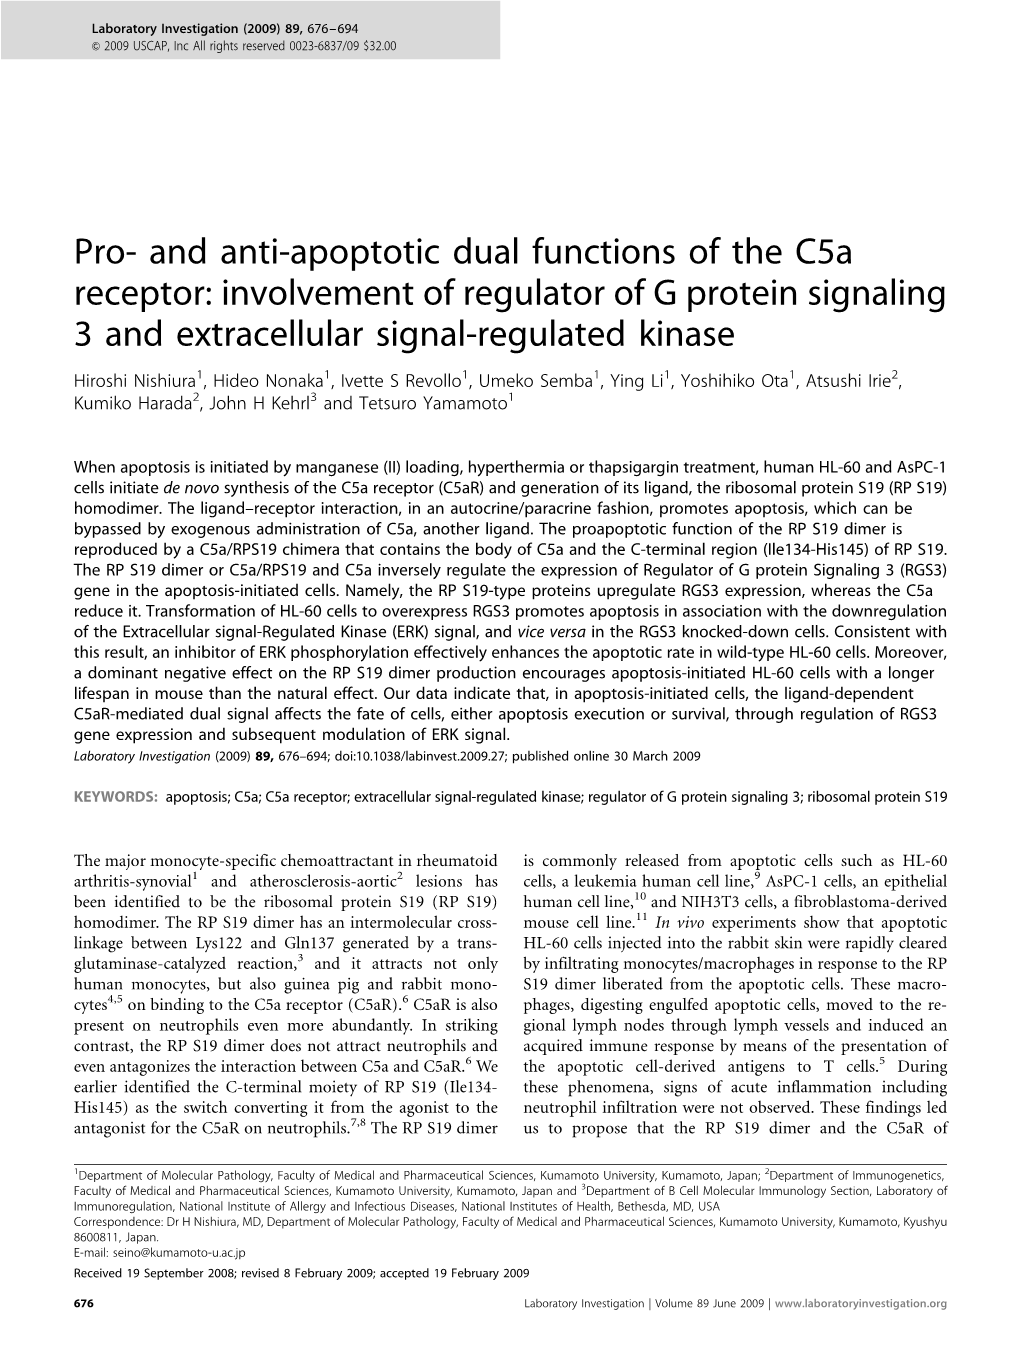 And Anti-Apoptotic Dual Functions of the C5a Receptor